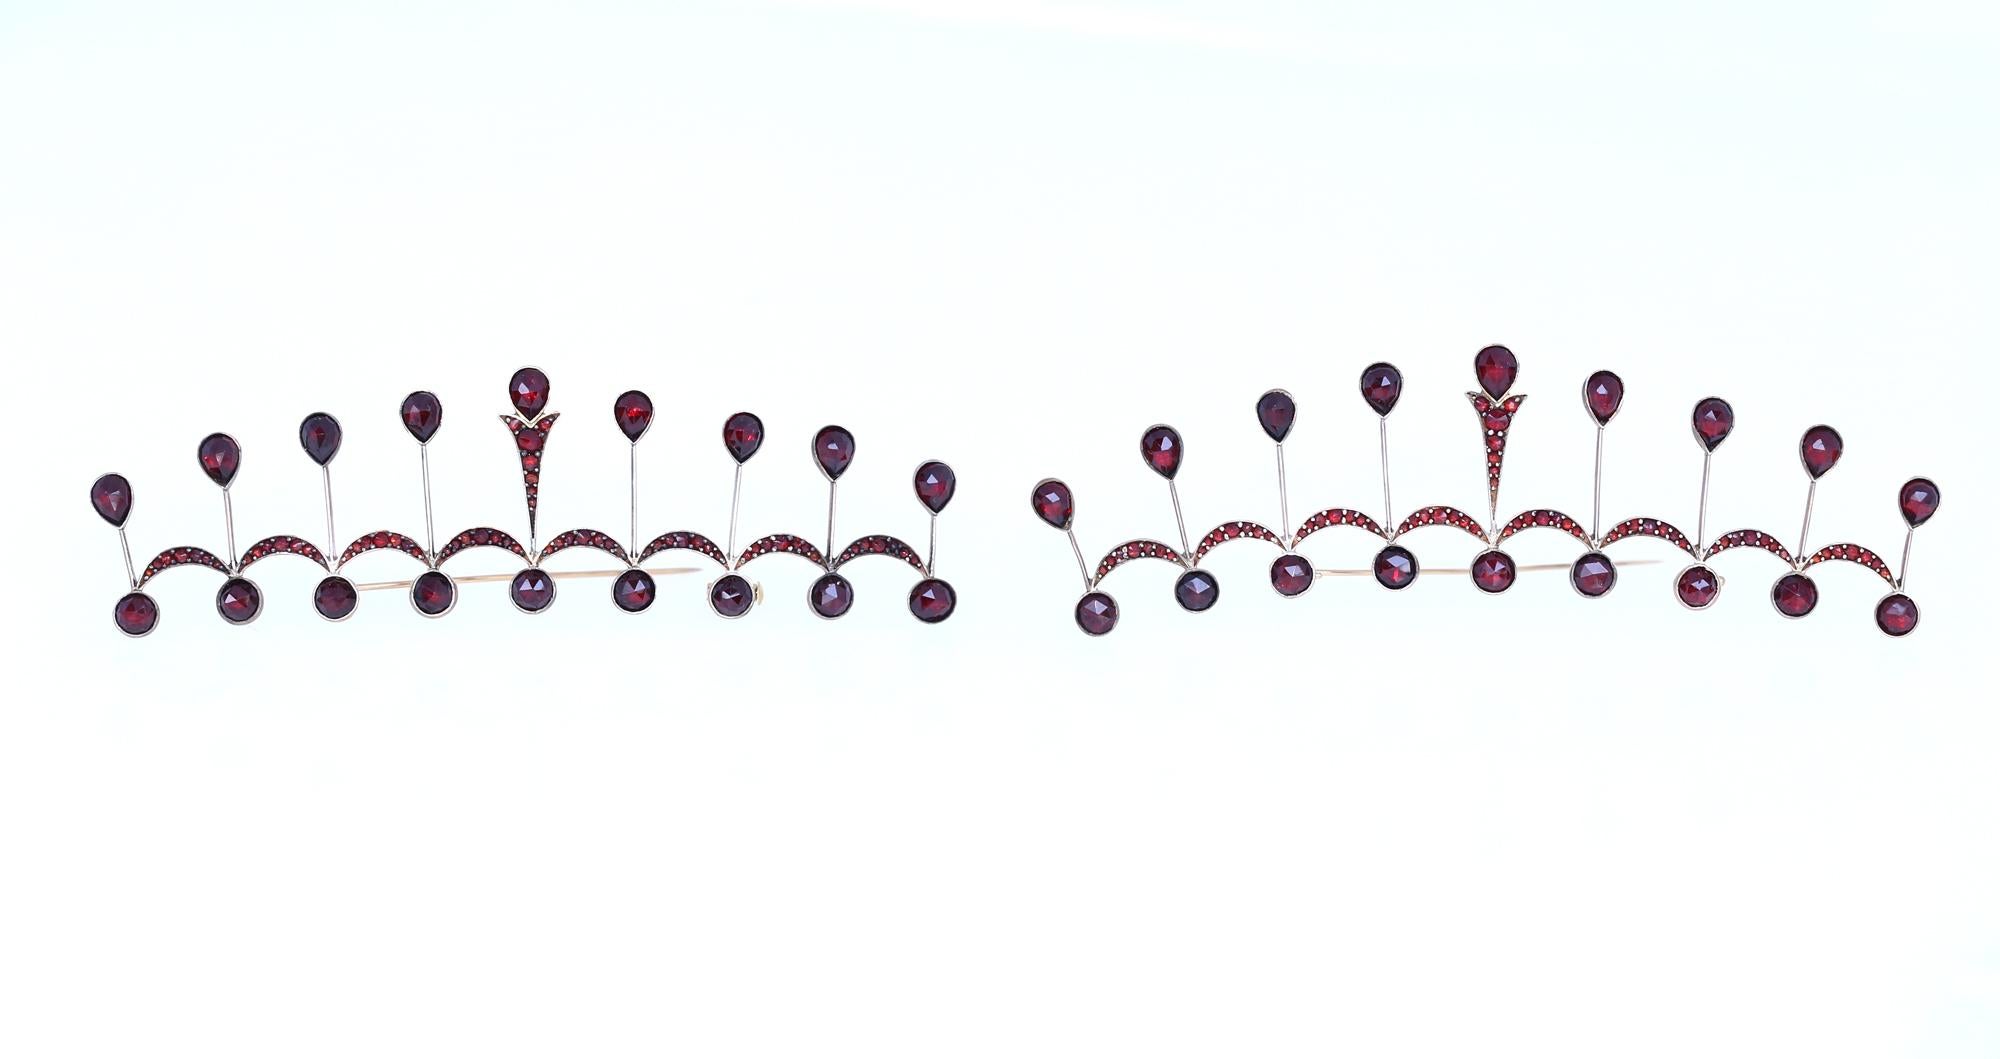 A pair of Garnet Brooches depicting tiara or a crown. Silver with Gold, a technique used at that time. Very unusual and collectable jewelry from the early 20th century. 
Garnet is known to be a stone of the month of January. Very deep red color. It